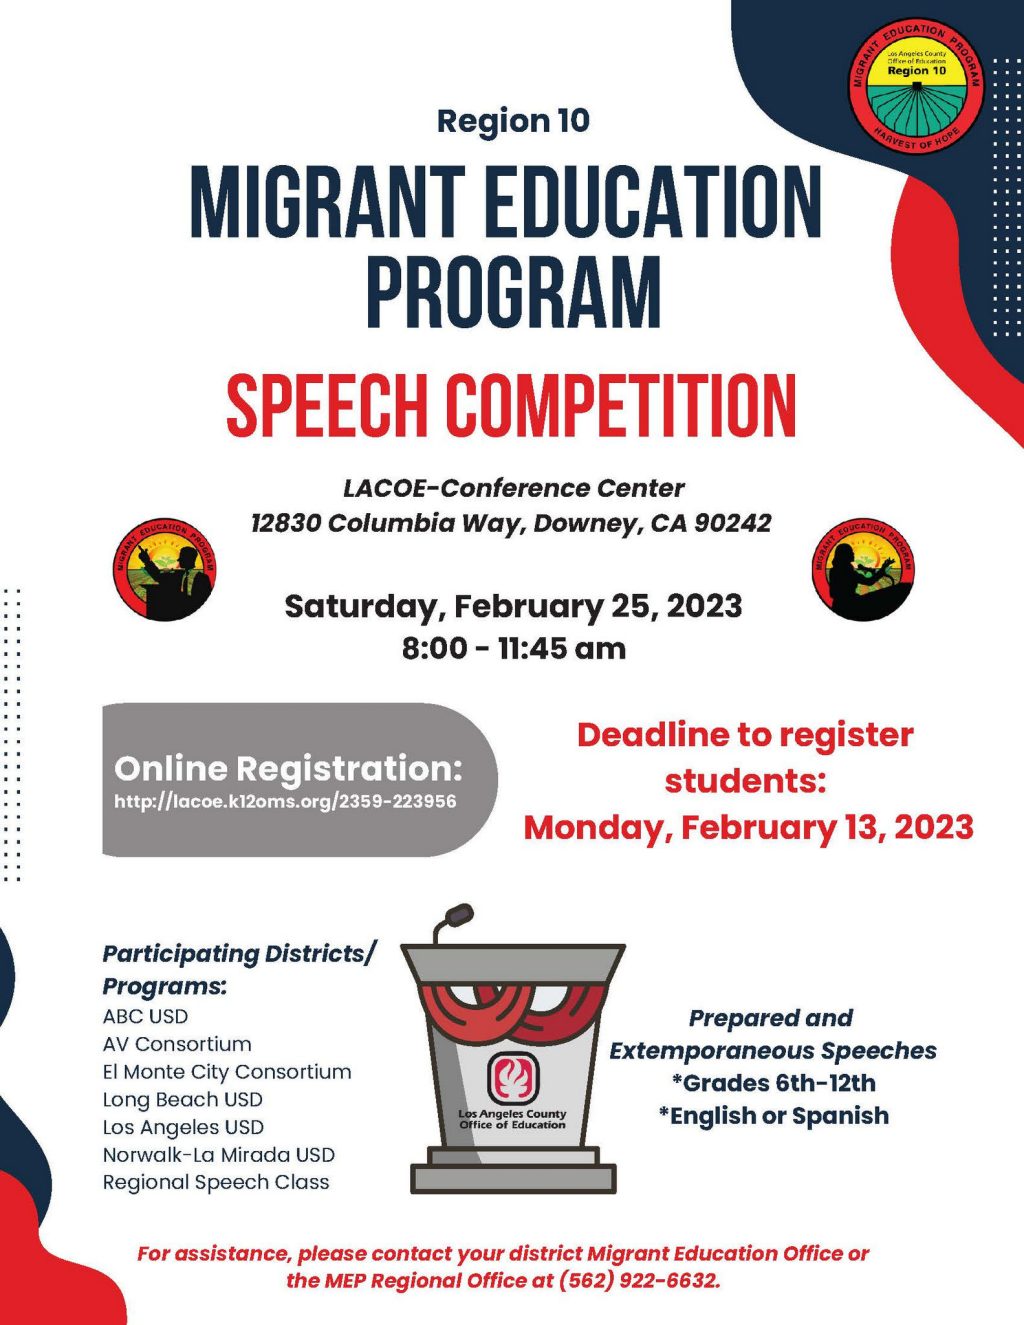 Speech competition flyer